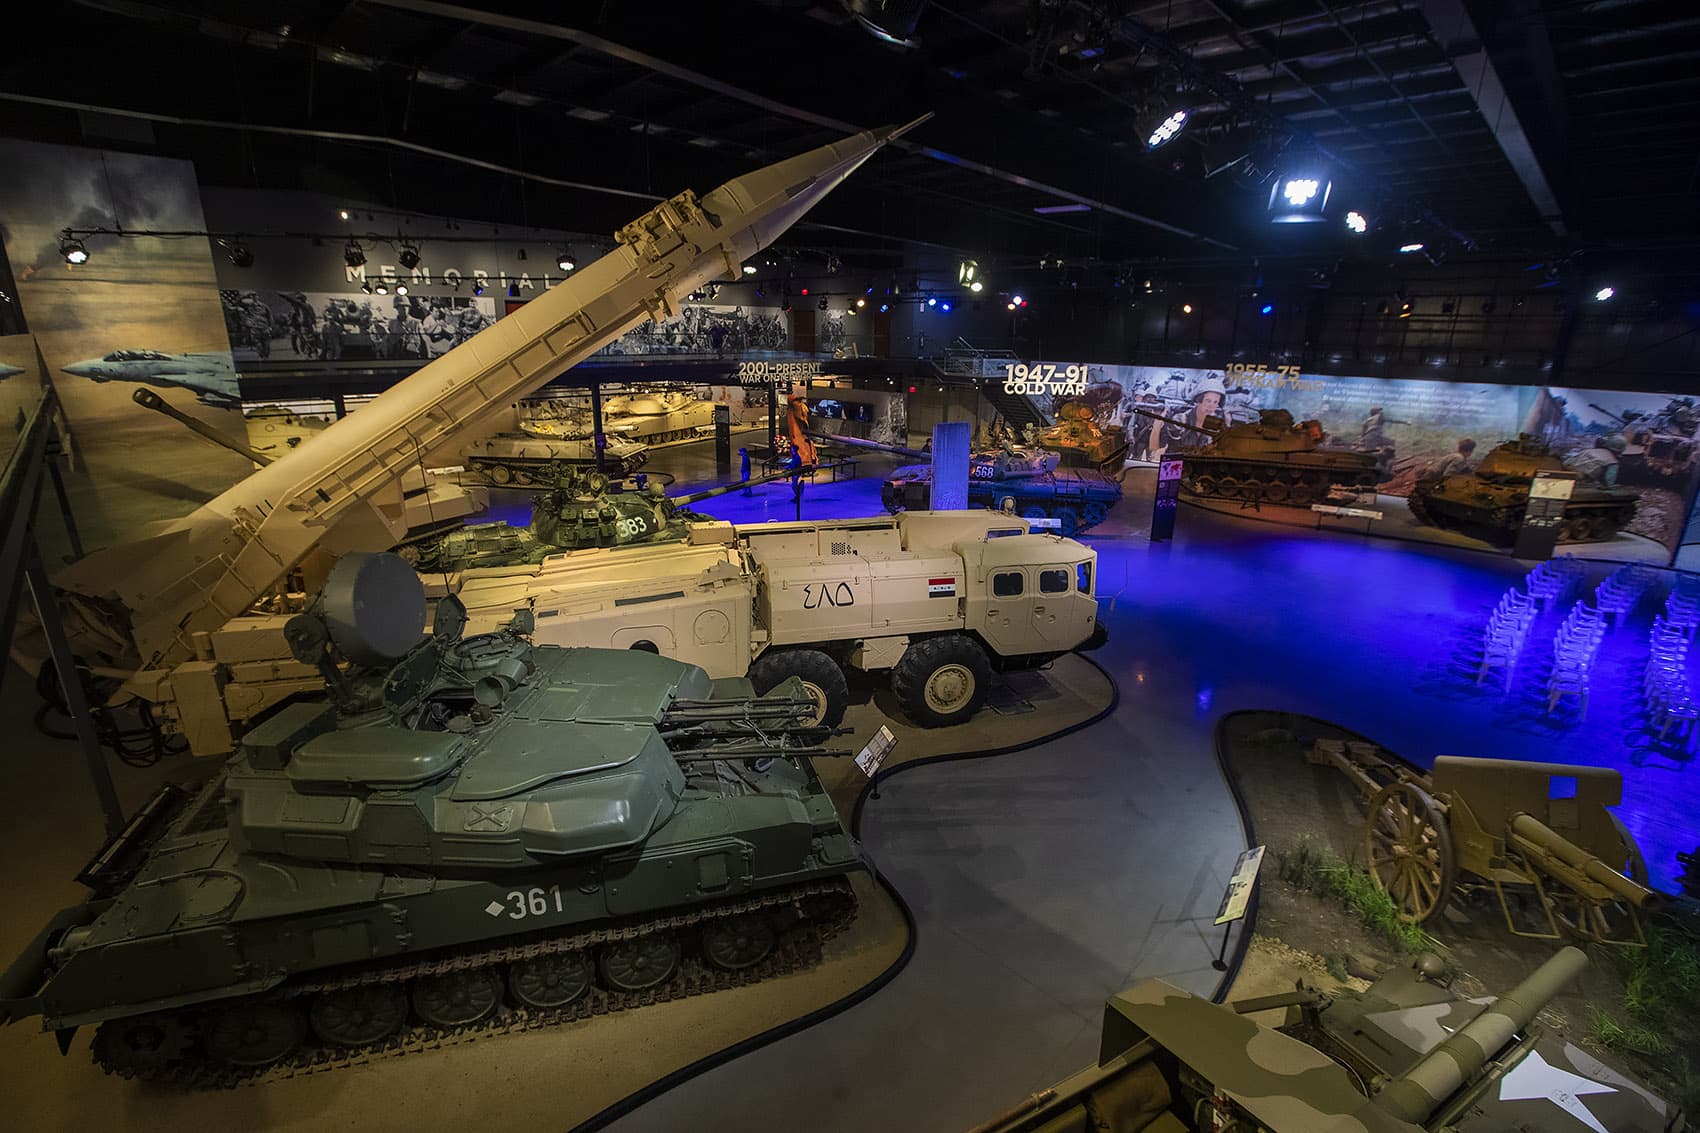 The American Heritage Museum in Stow, which opens to the public Friday, features tanks, armored vehicles and military artifacts. (Jesse Costa/WBUR)